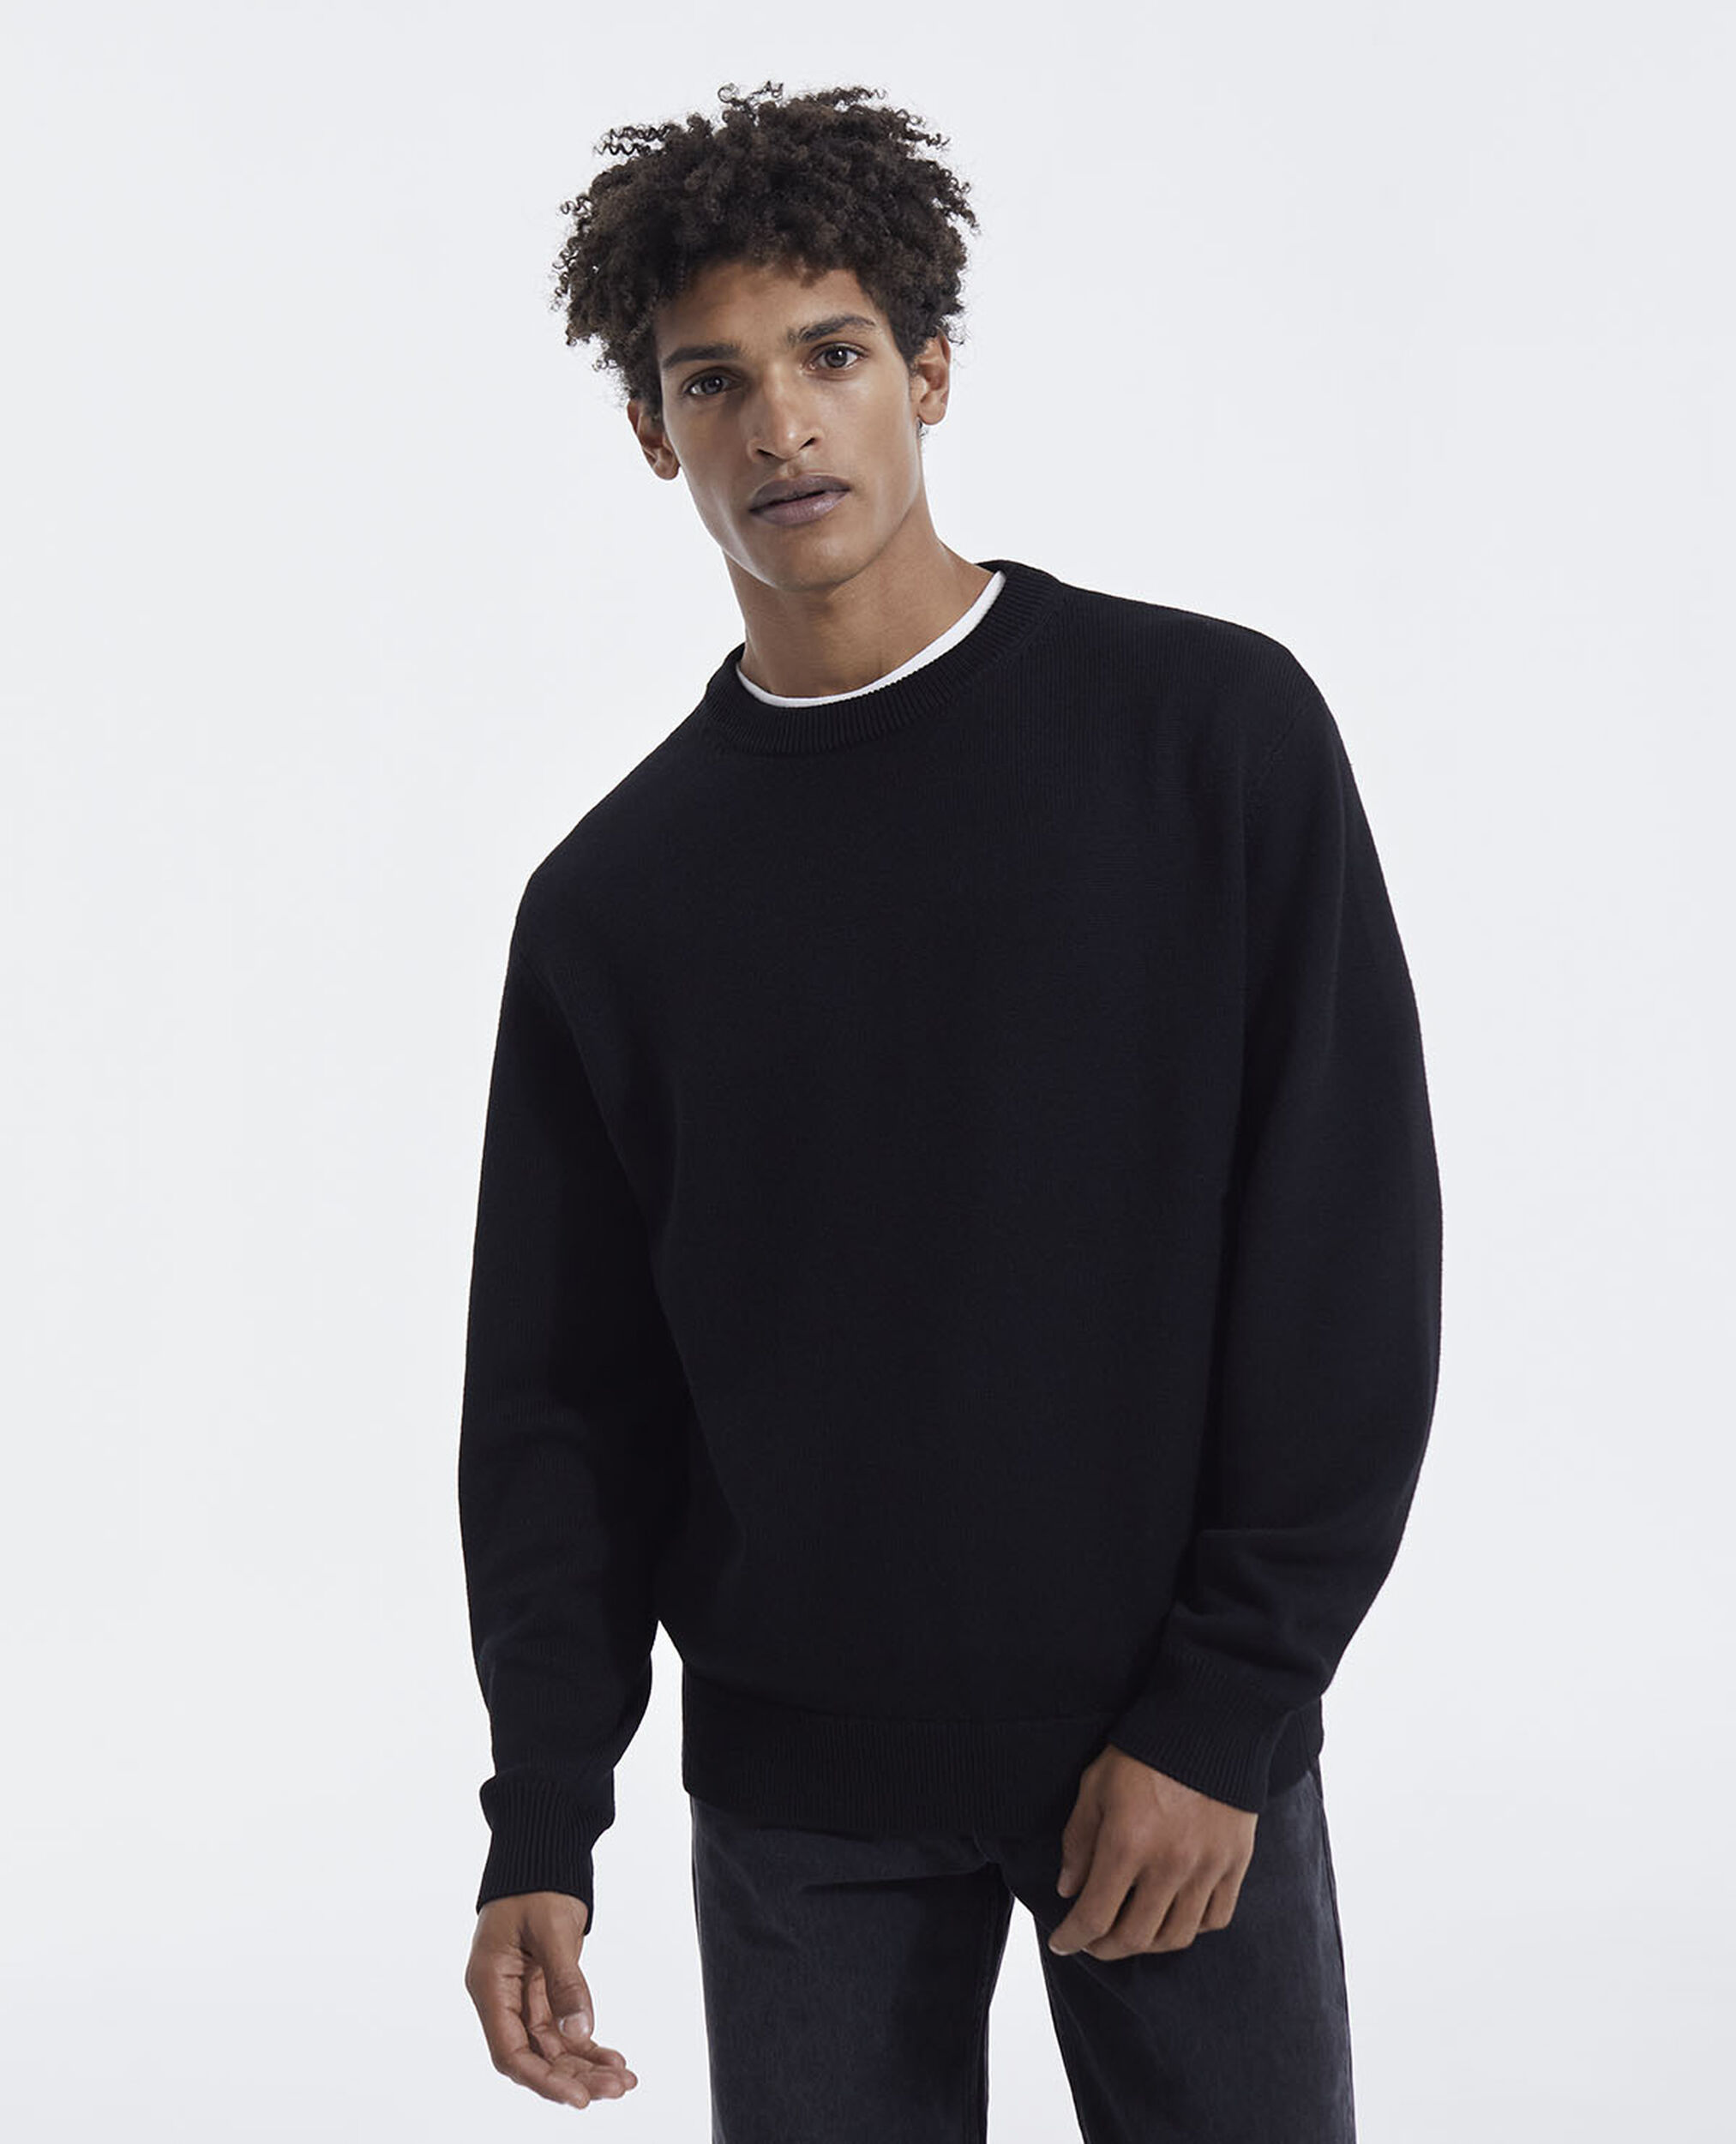 Black knit sweater with triple band crew neck, BLACK, hi-res image number null